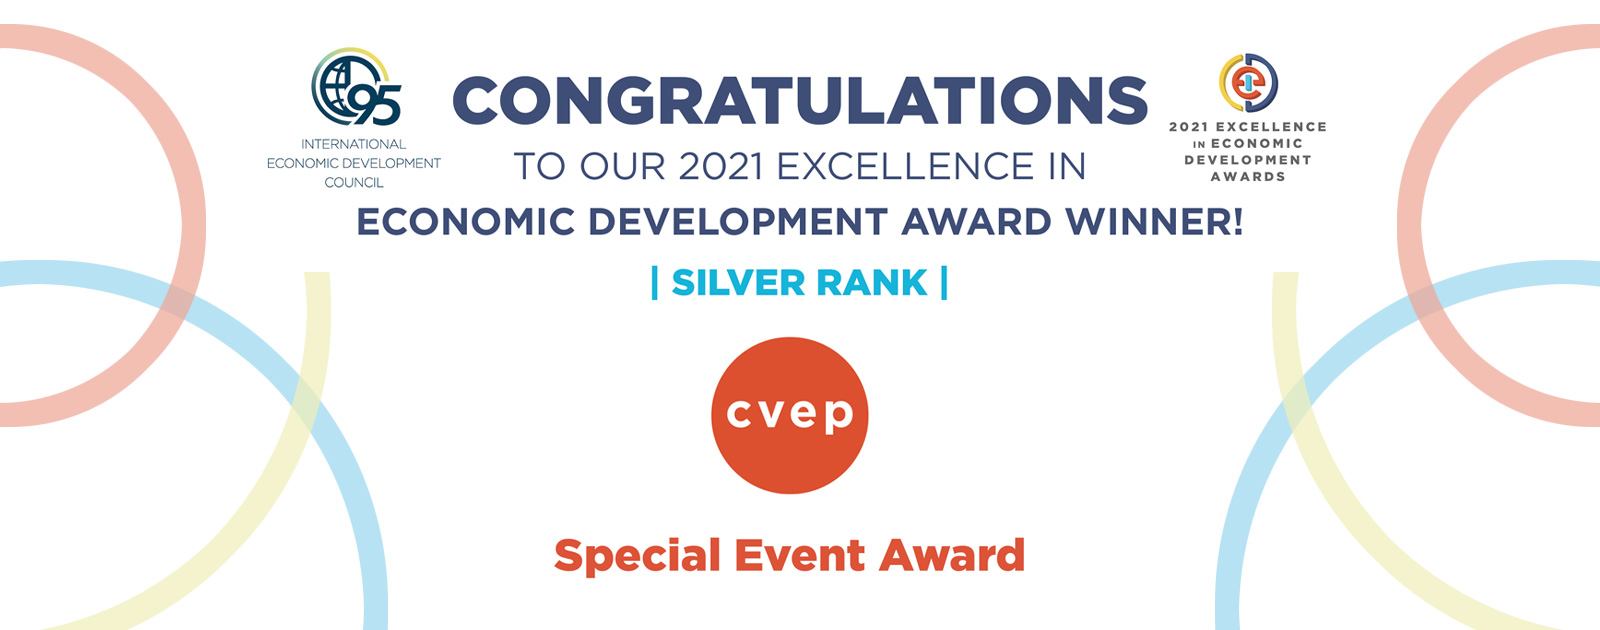 Congratulations to our 2021 excellence in economic development award winner, silver rank, CVEP